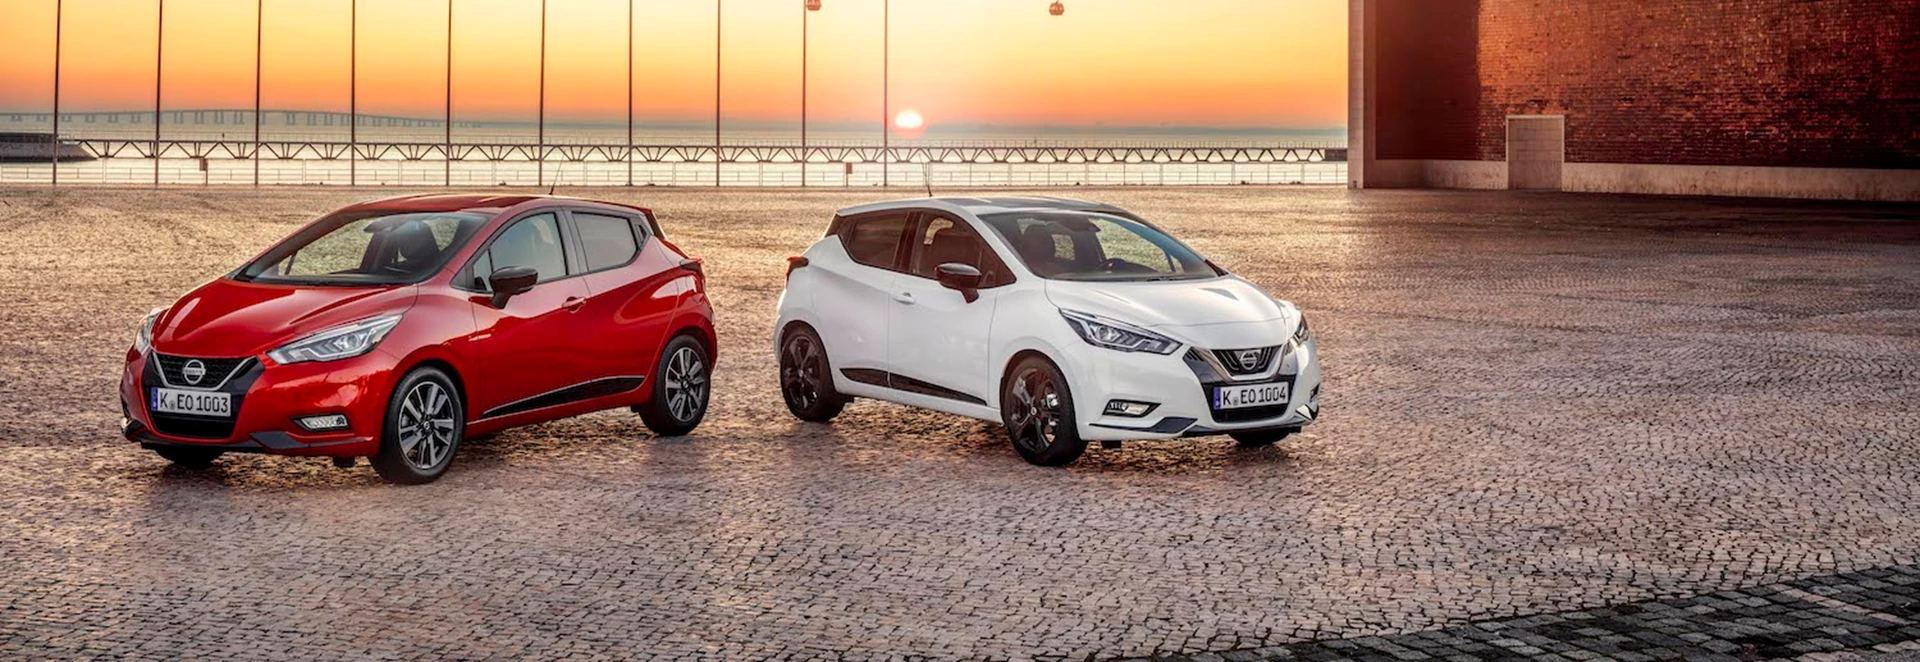 Facelifted Nissan Micra gets new engines and trim level